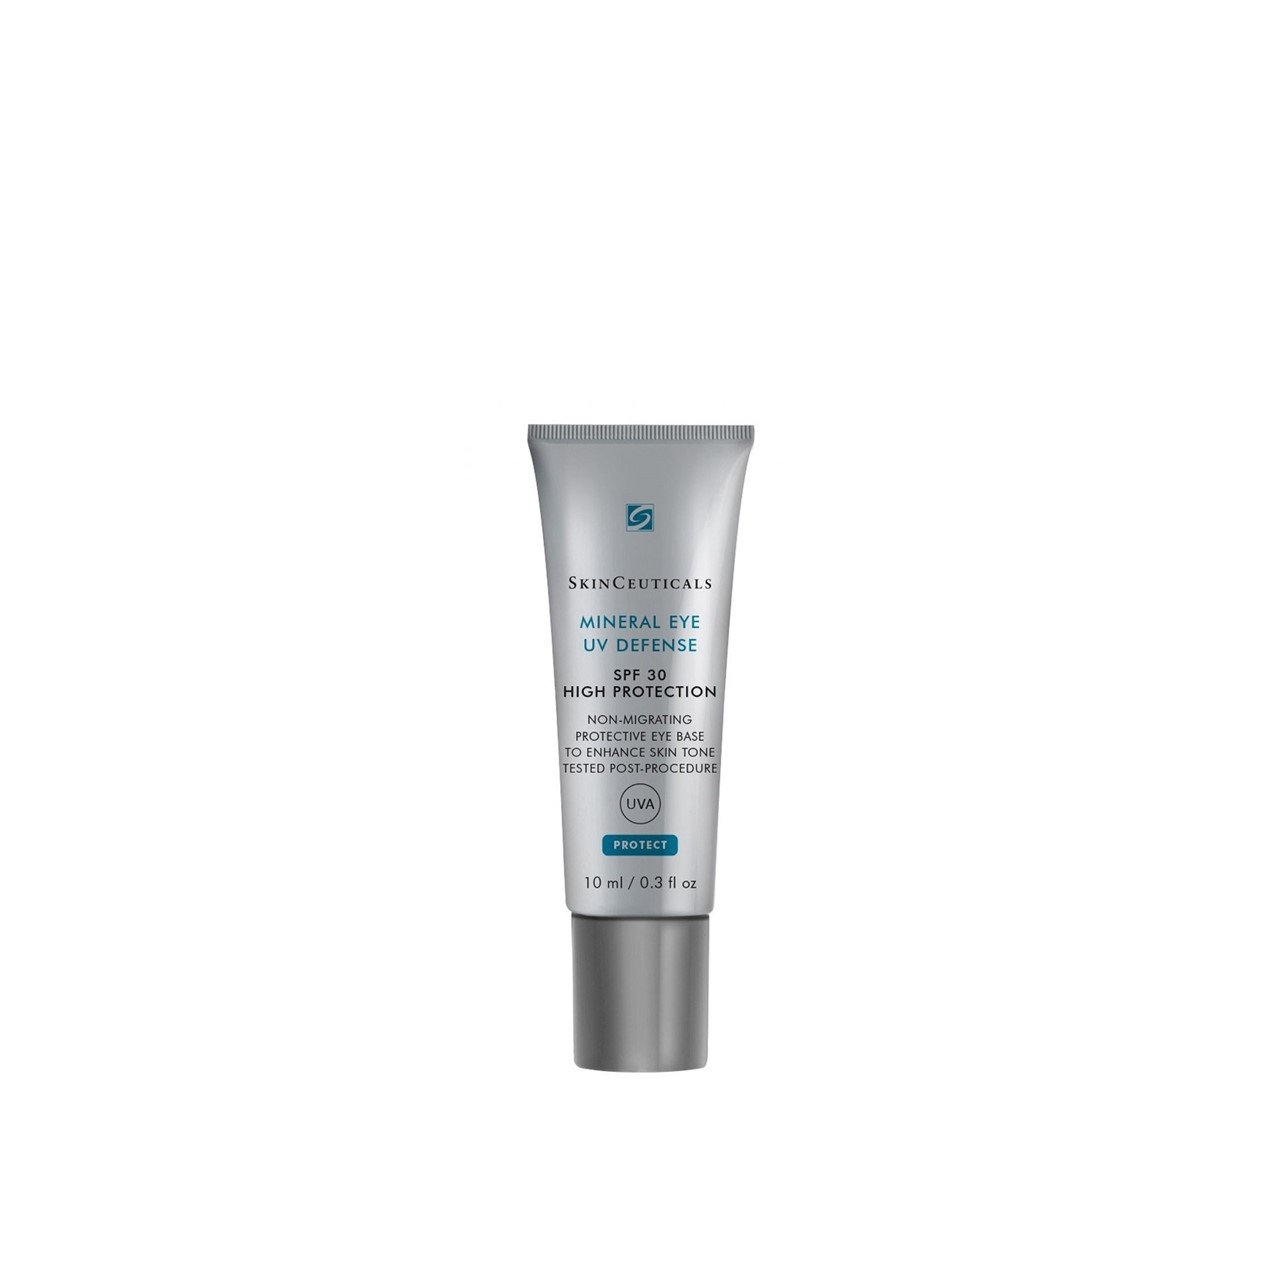 SkinCeuticals Protect Mineral Eye UV Defense FPS30 10ml